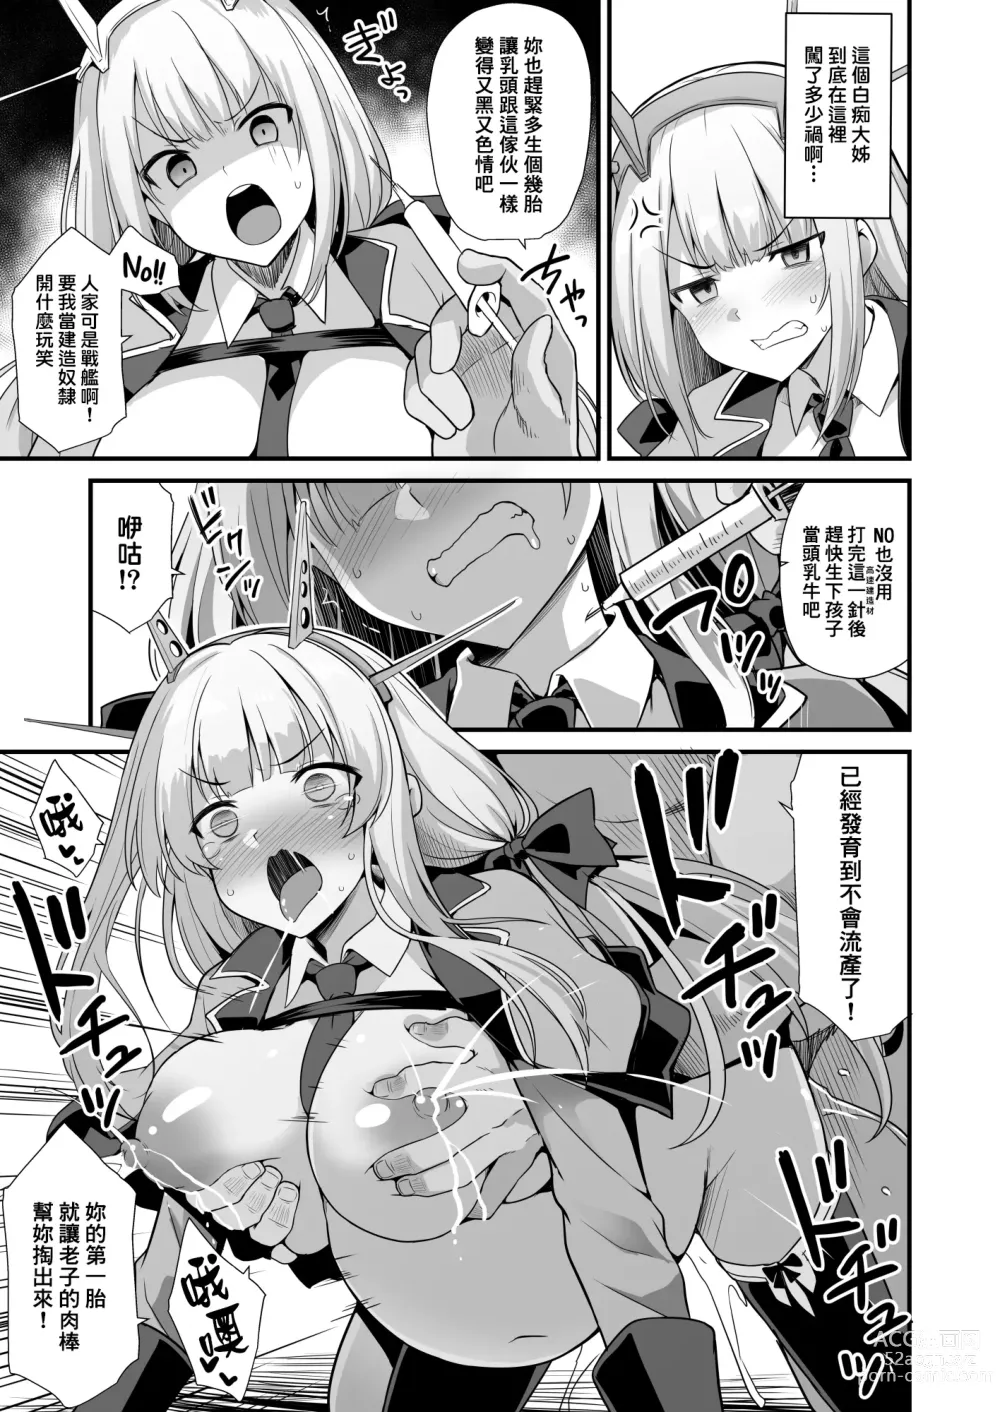 Page 3 of doujinshi 科羅拉多的後日談